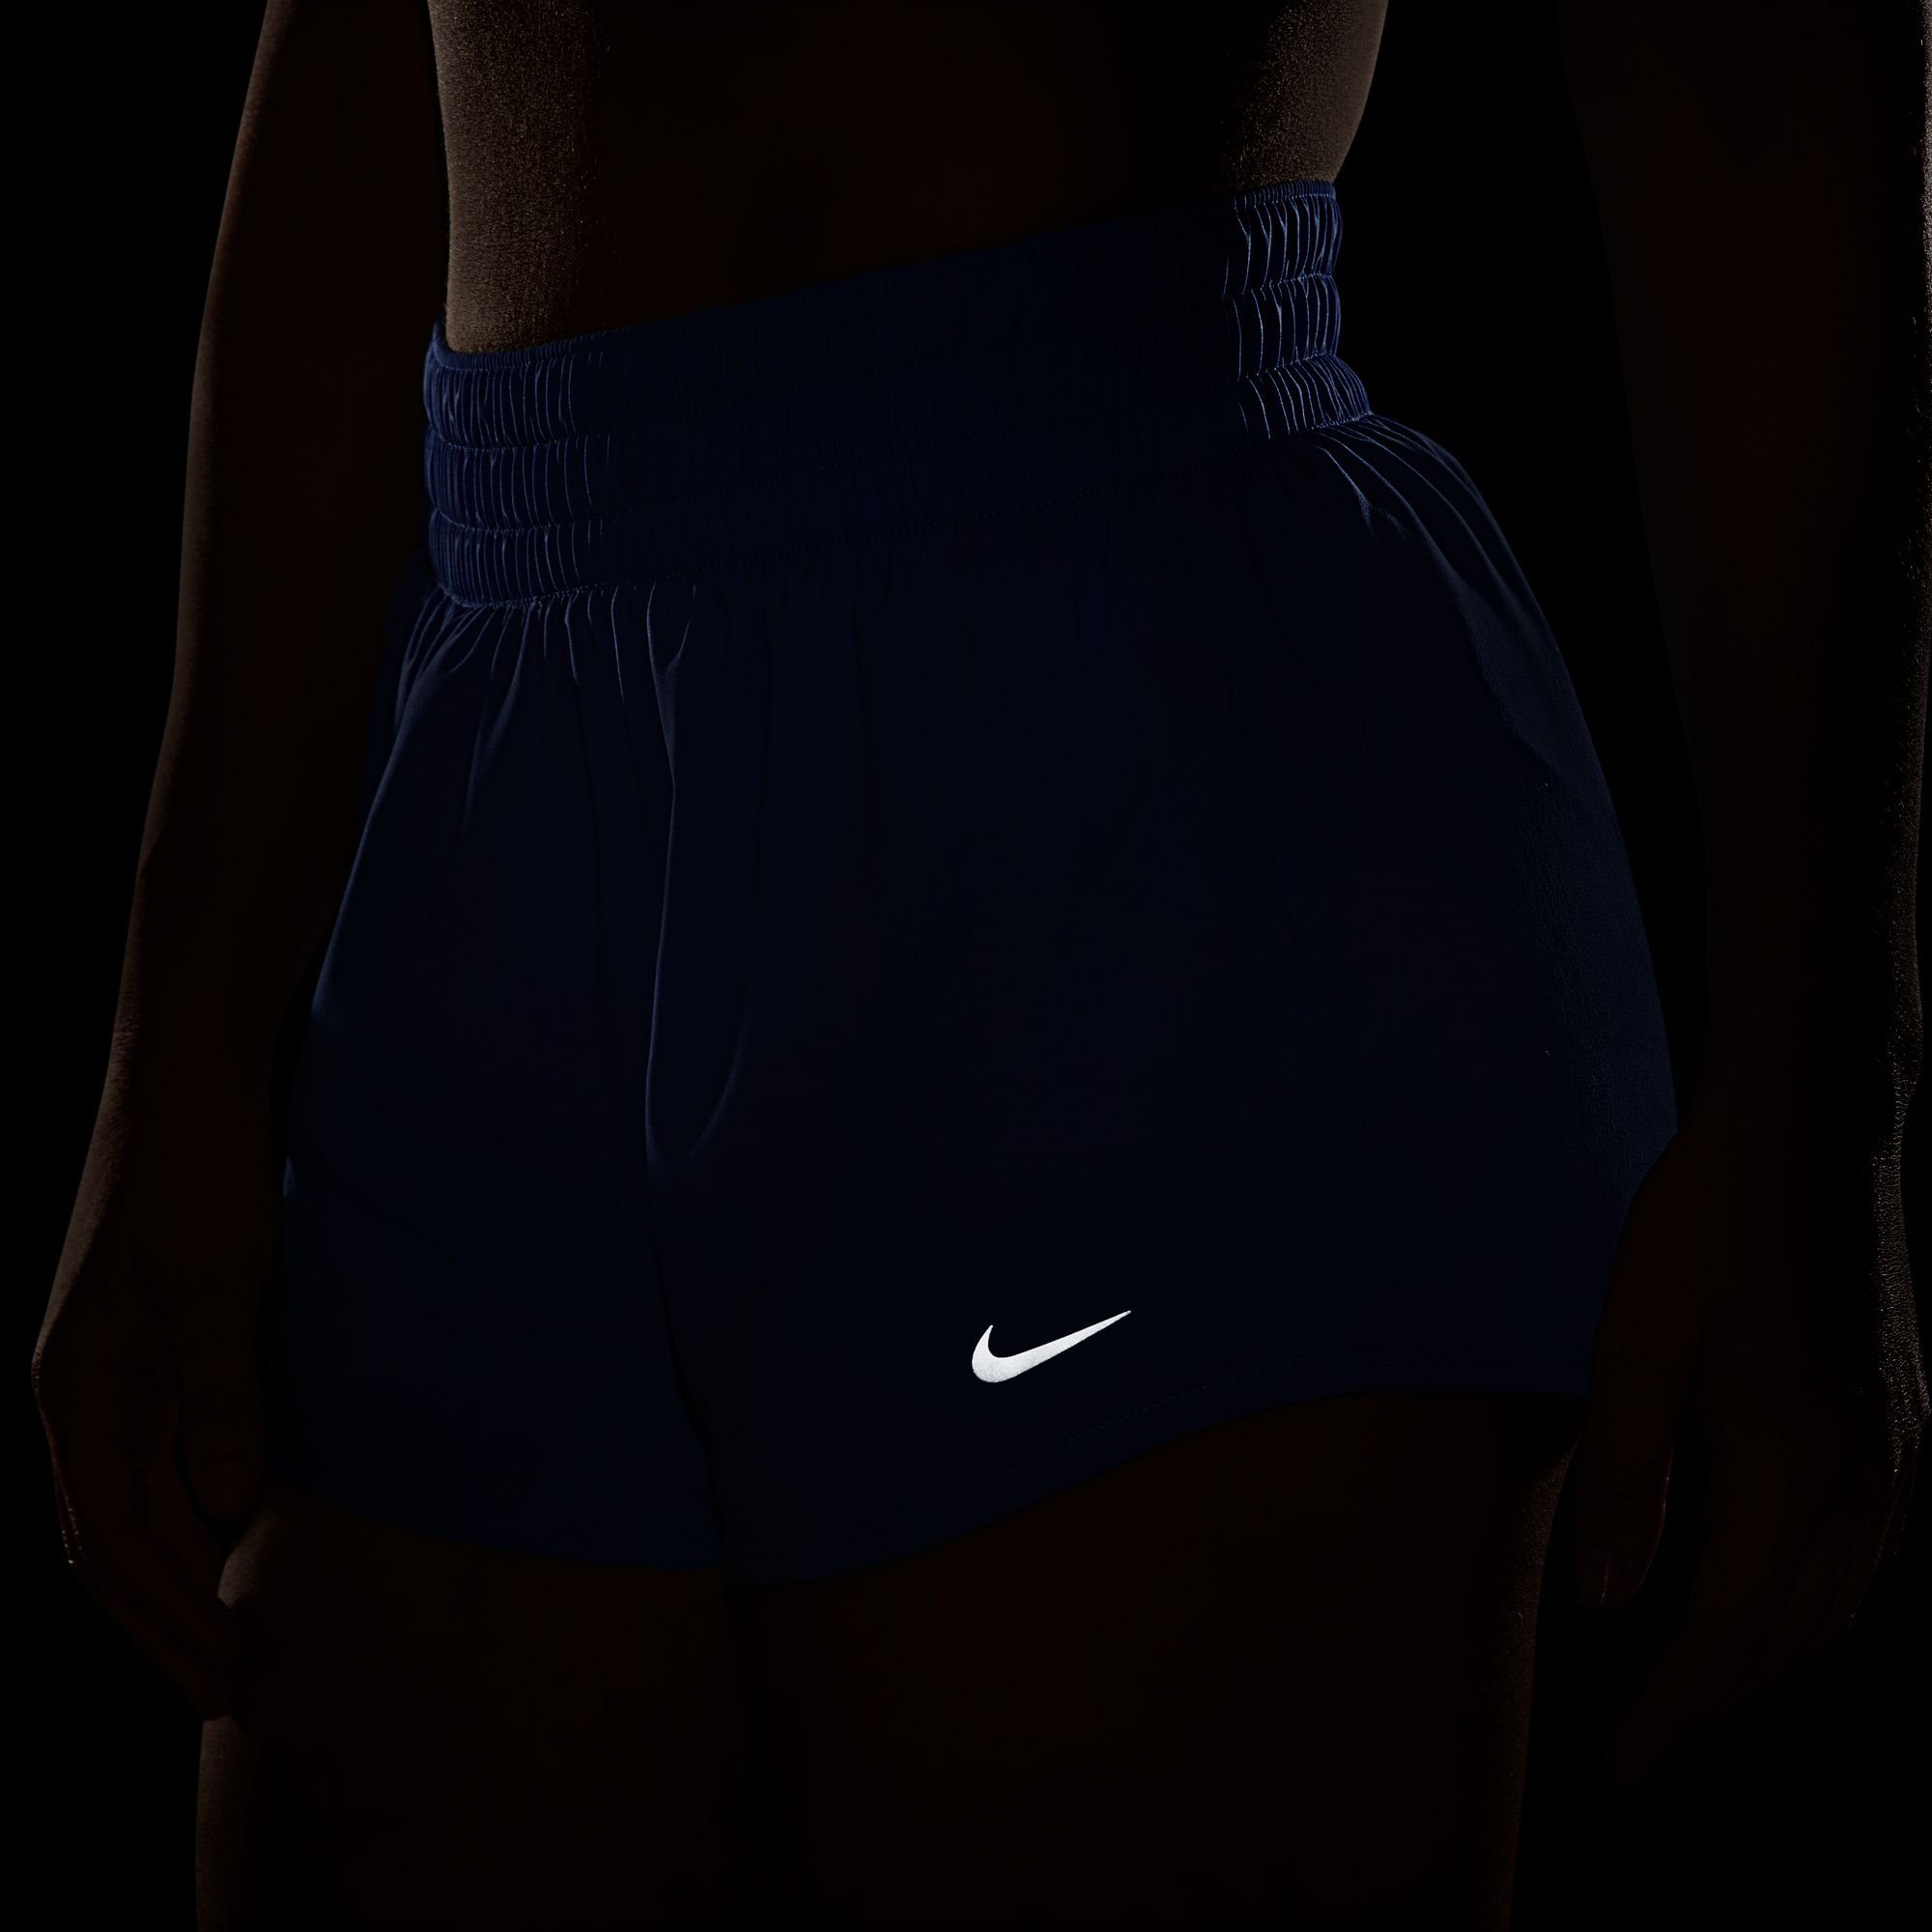 SHORTS BRIEF-LINED WOMEN'S Trainingsshorts SILV MID-RISE ONE POLAR/REFLECTIVE DRI-FIT Nike